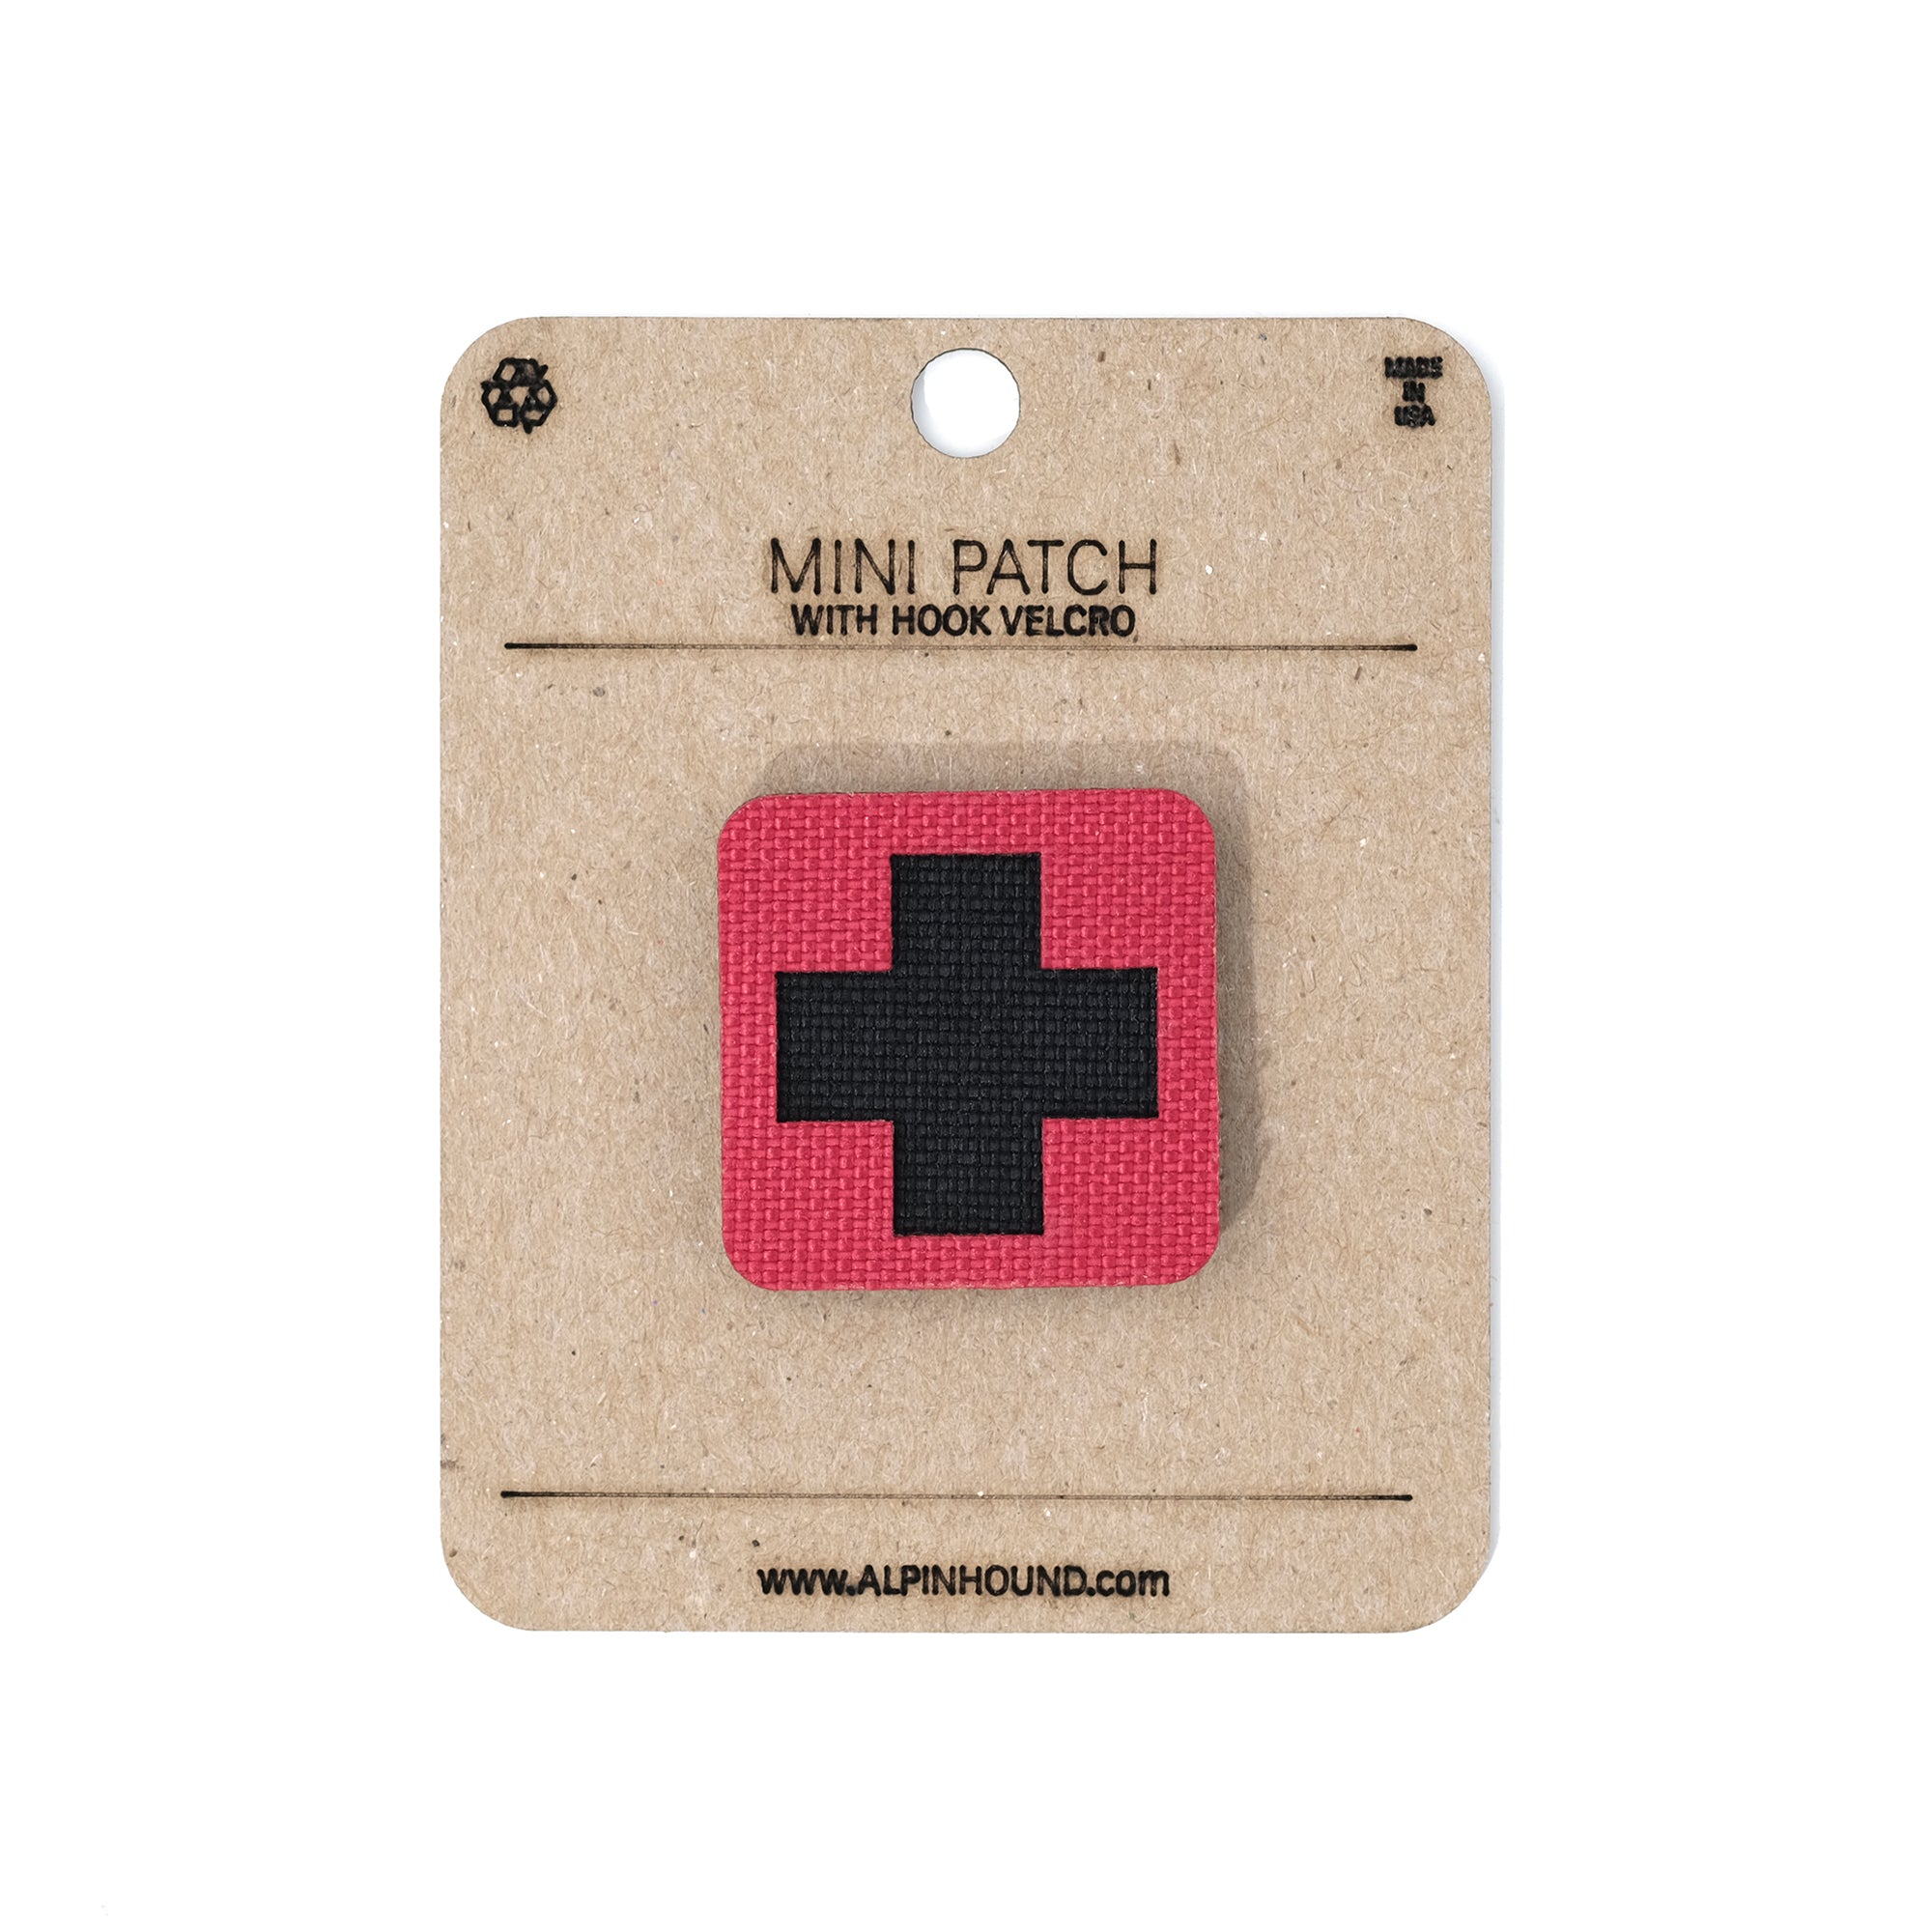 Medical Cross Tactical Patch 1X1